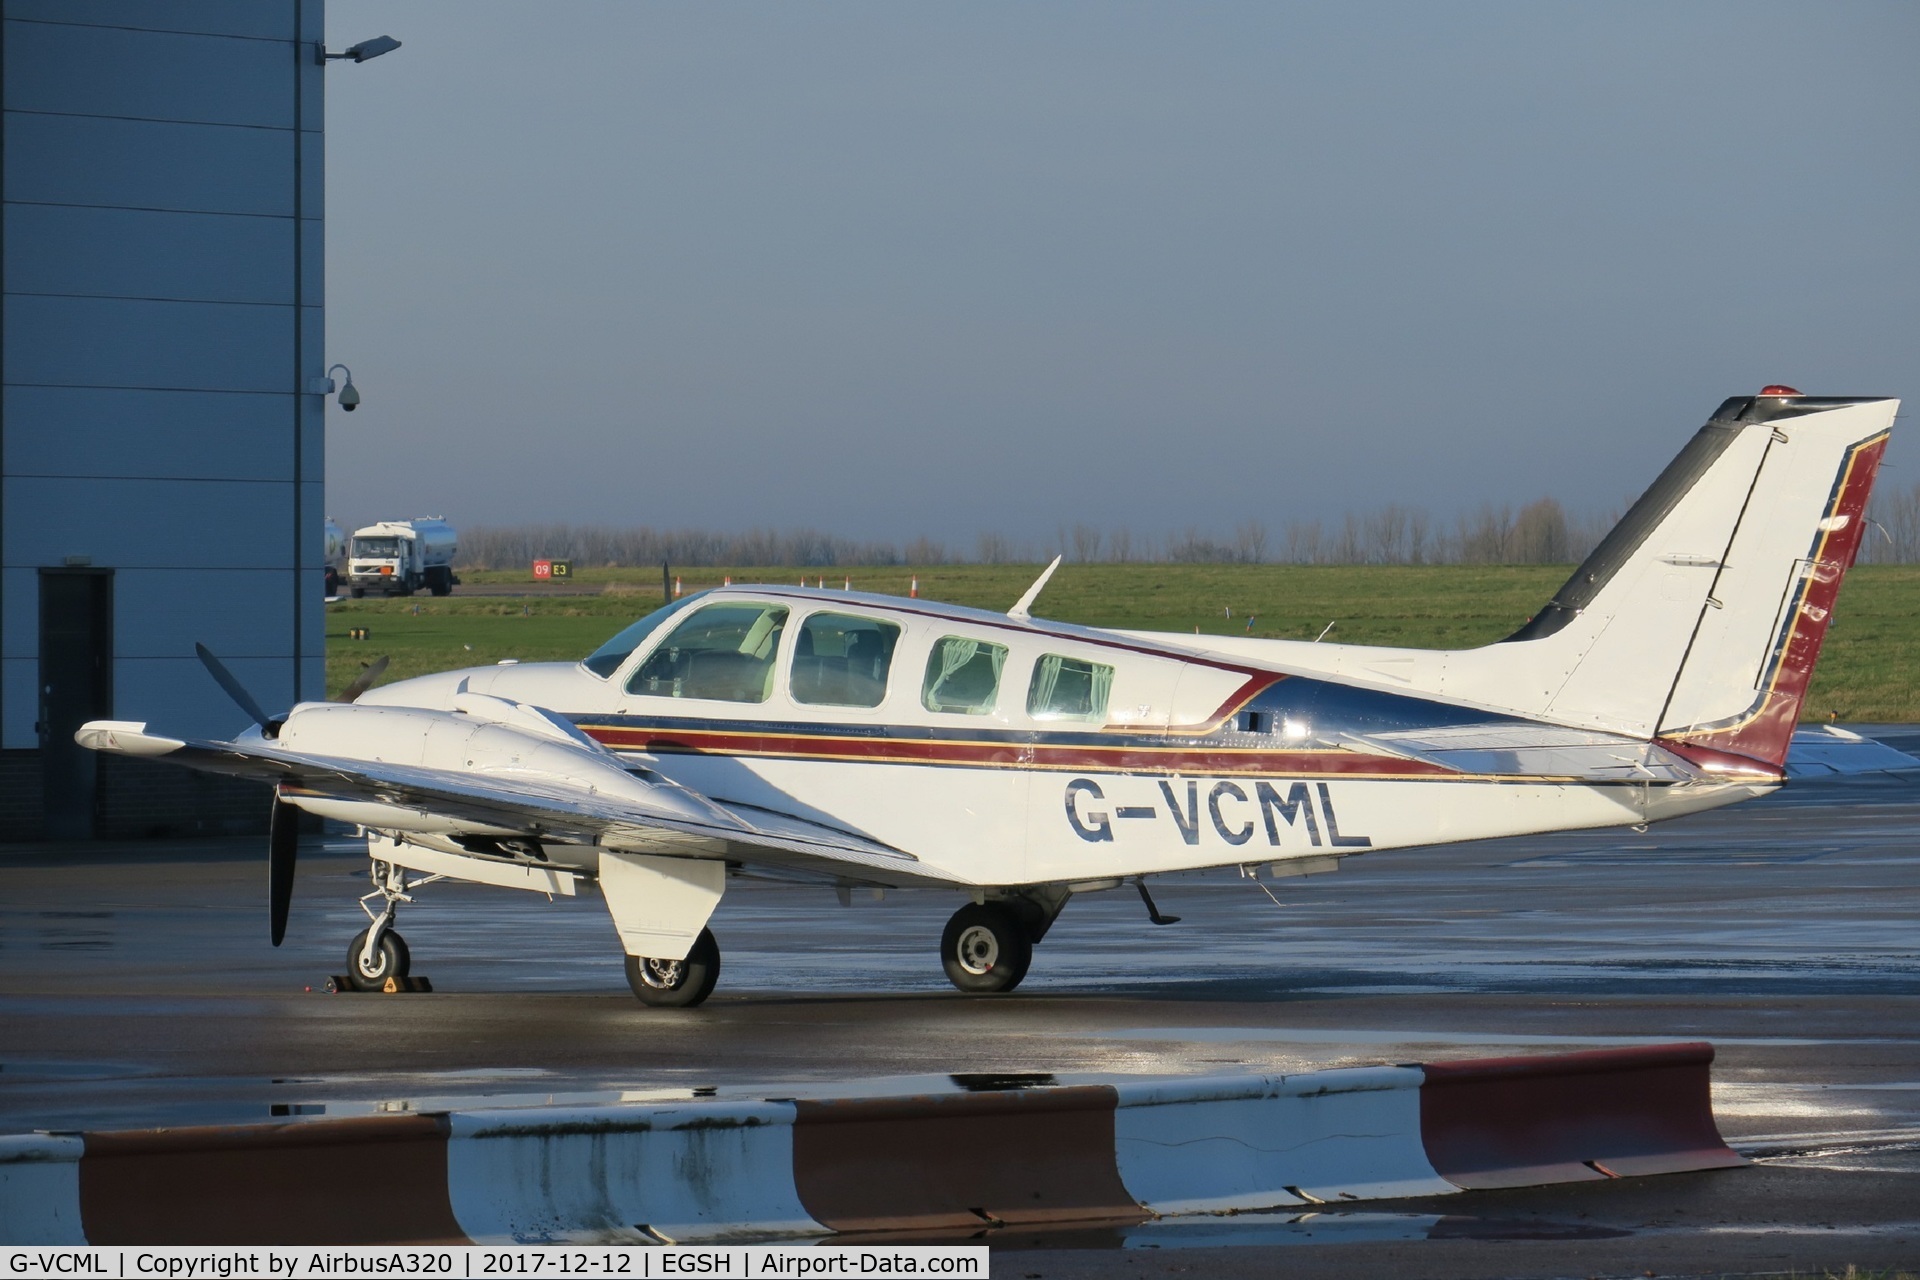 G-VCML, 1982 Beech 58 Baron C/N TH-1346, Seen parked at Saxons